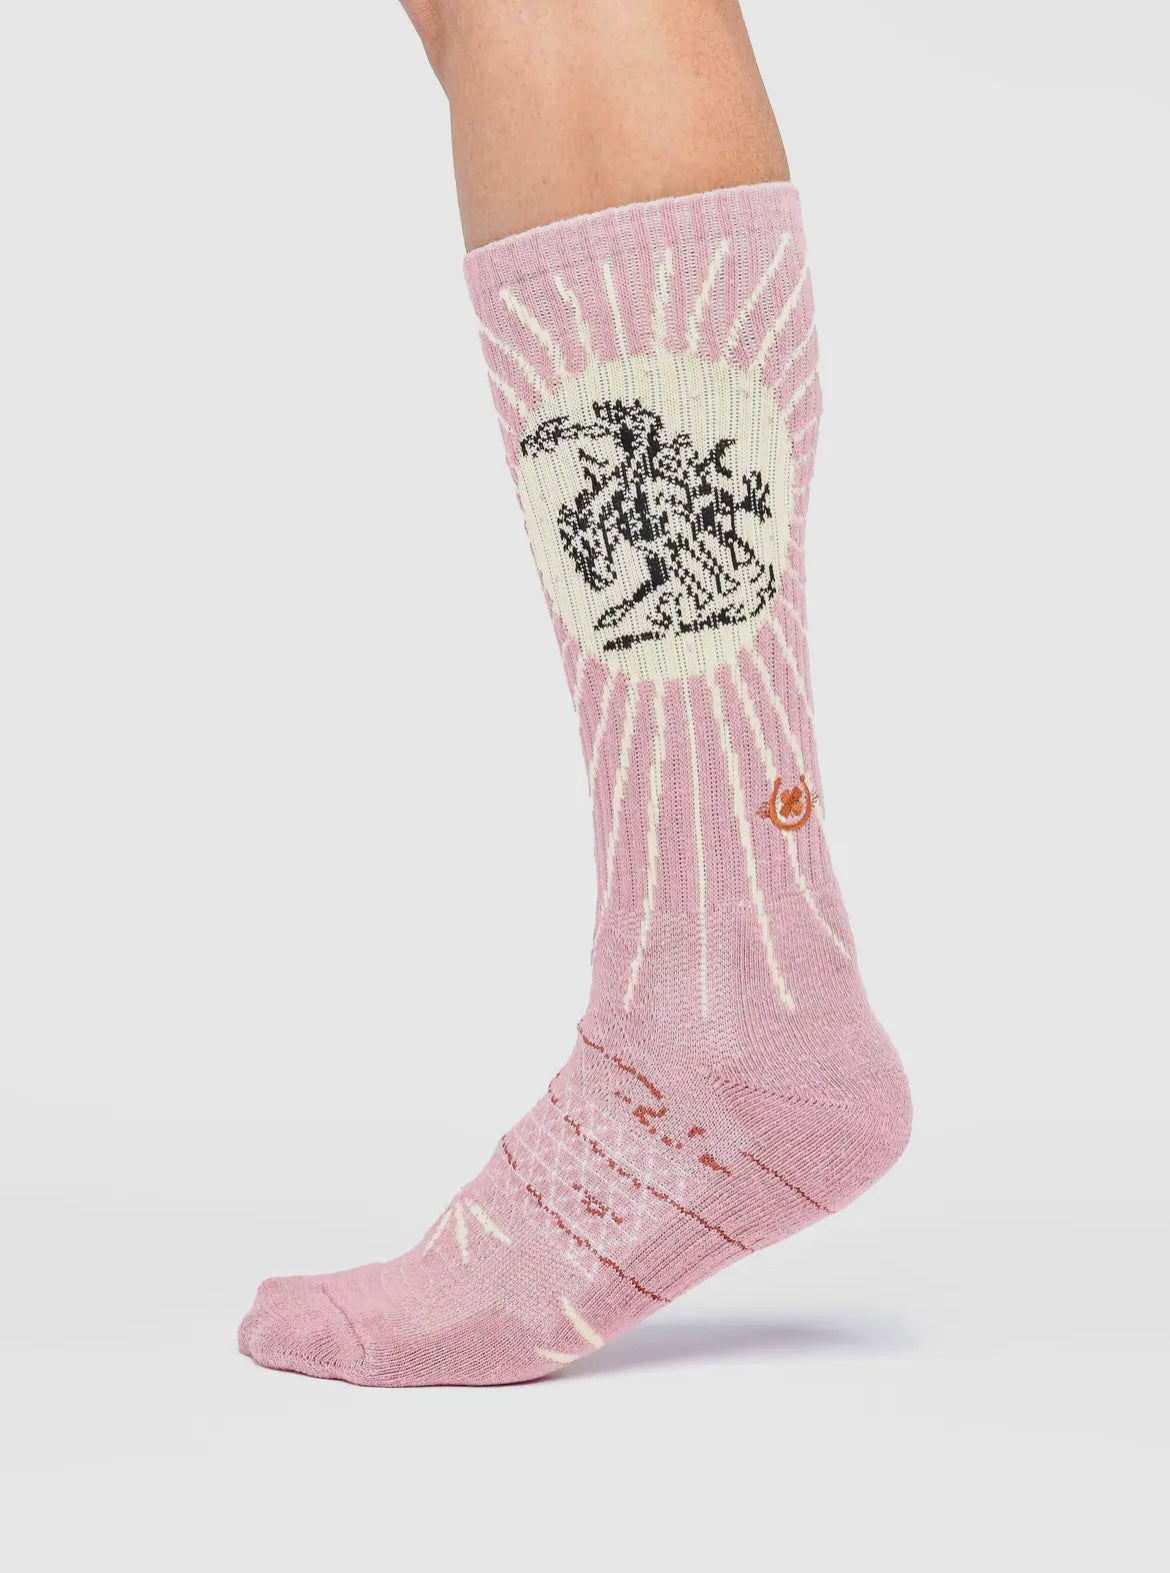 The Bucking Horse Socks in Pink